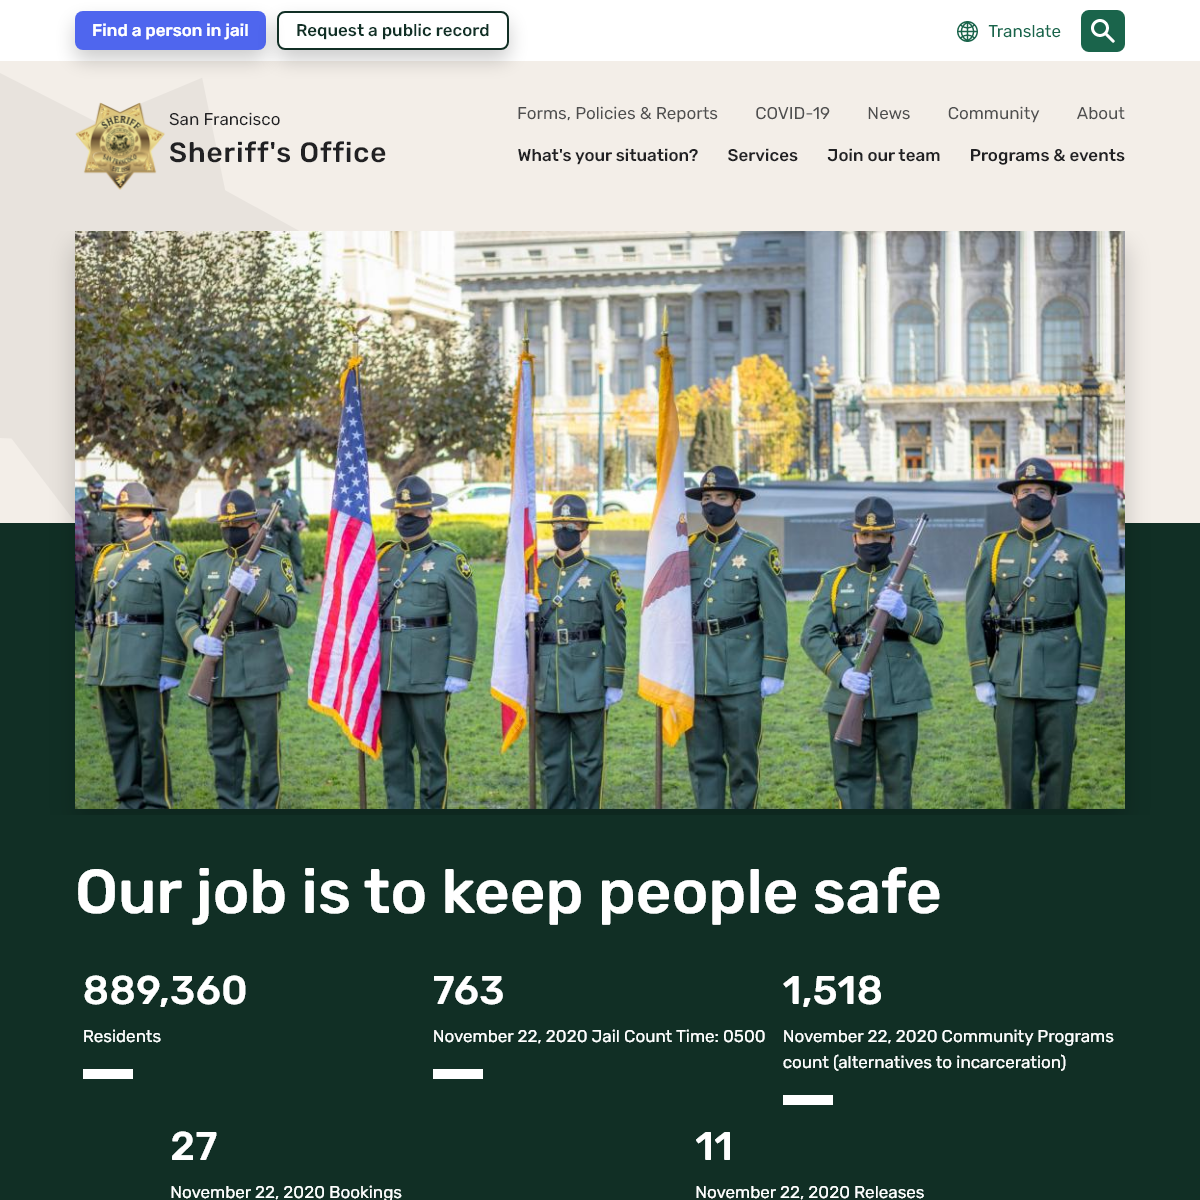 A complete backup of sfsheriff.com